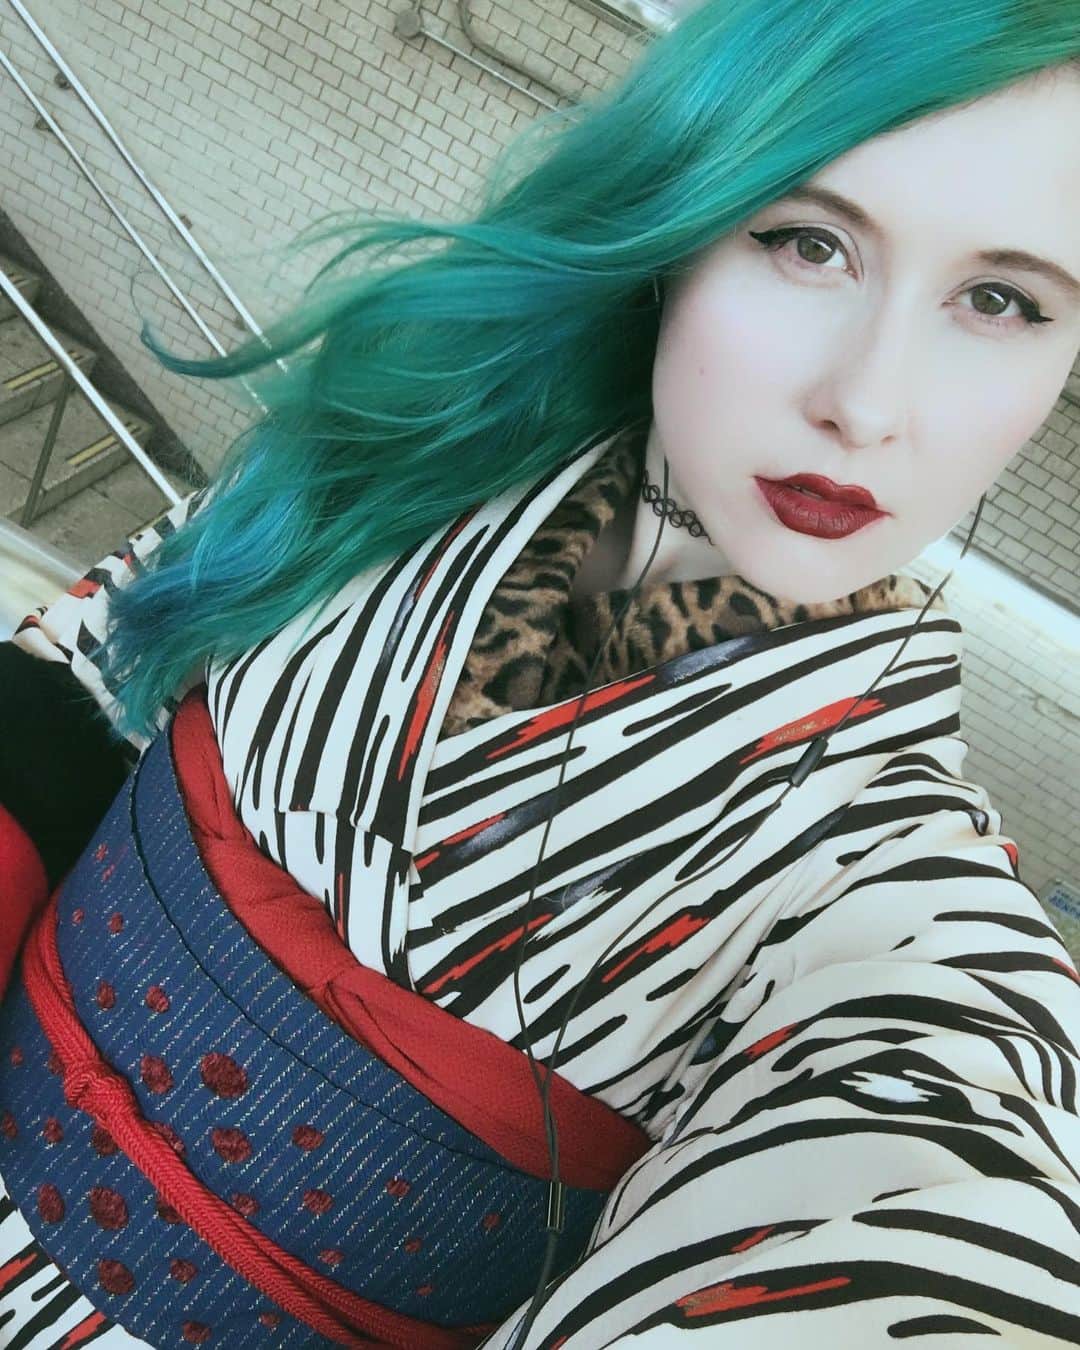 Anji SALZのインスタグラム：「2018 → 2023 I love how kimono can so obviously change its owner and start a new life.   I owned this amazing zebra / tiger striped kimono but decided to sell it. Someone bought it and I only met the new owner many years ago.  Now @kimono.anna upcycled it by adding fabric to it to make it wearable for her (she is much taller than me!) ❤️  I am always happy to see my kimono items out in the wild 🥺💕 So always tag me & @salzkimono pls 🙏🏻💫😊  2018→2023💫 着物の持ち主が変わったり、着物は生まれ変わったりして本当に素晴らしいですよね❤️  #salztokyo #salzkimono #vintage #kimono #japanesekimono #japan #vintagefashion #ootd #remake #reuse #japanesefashion #tokyofashion #kimonostyle #和装 #和服 #着物コーディネート #古着 #着物女子 #アンティーク着物」